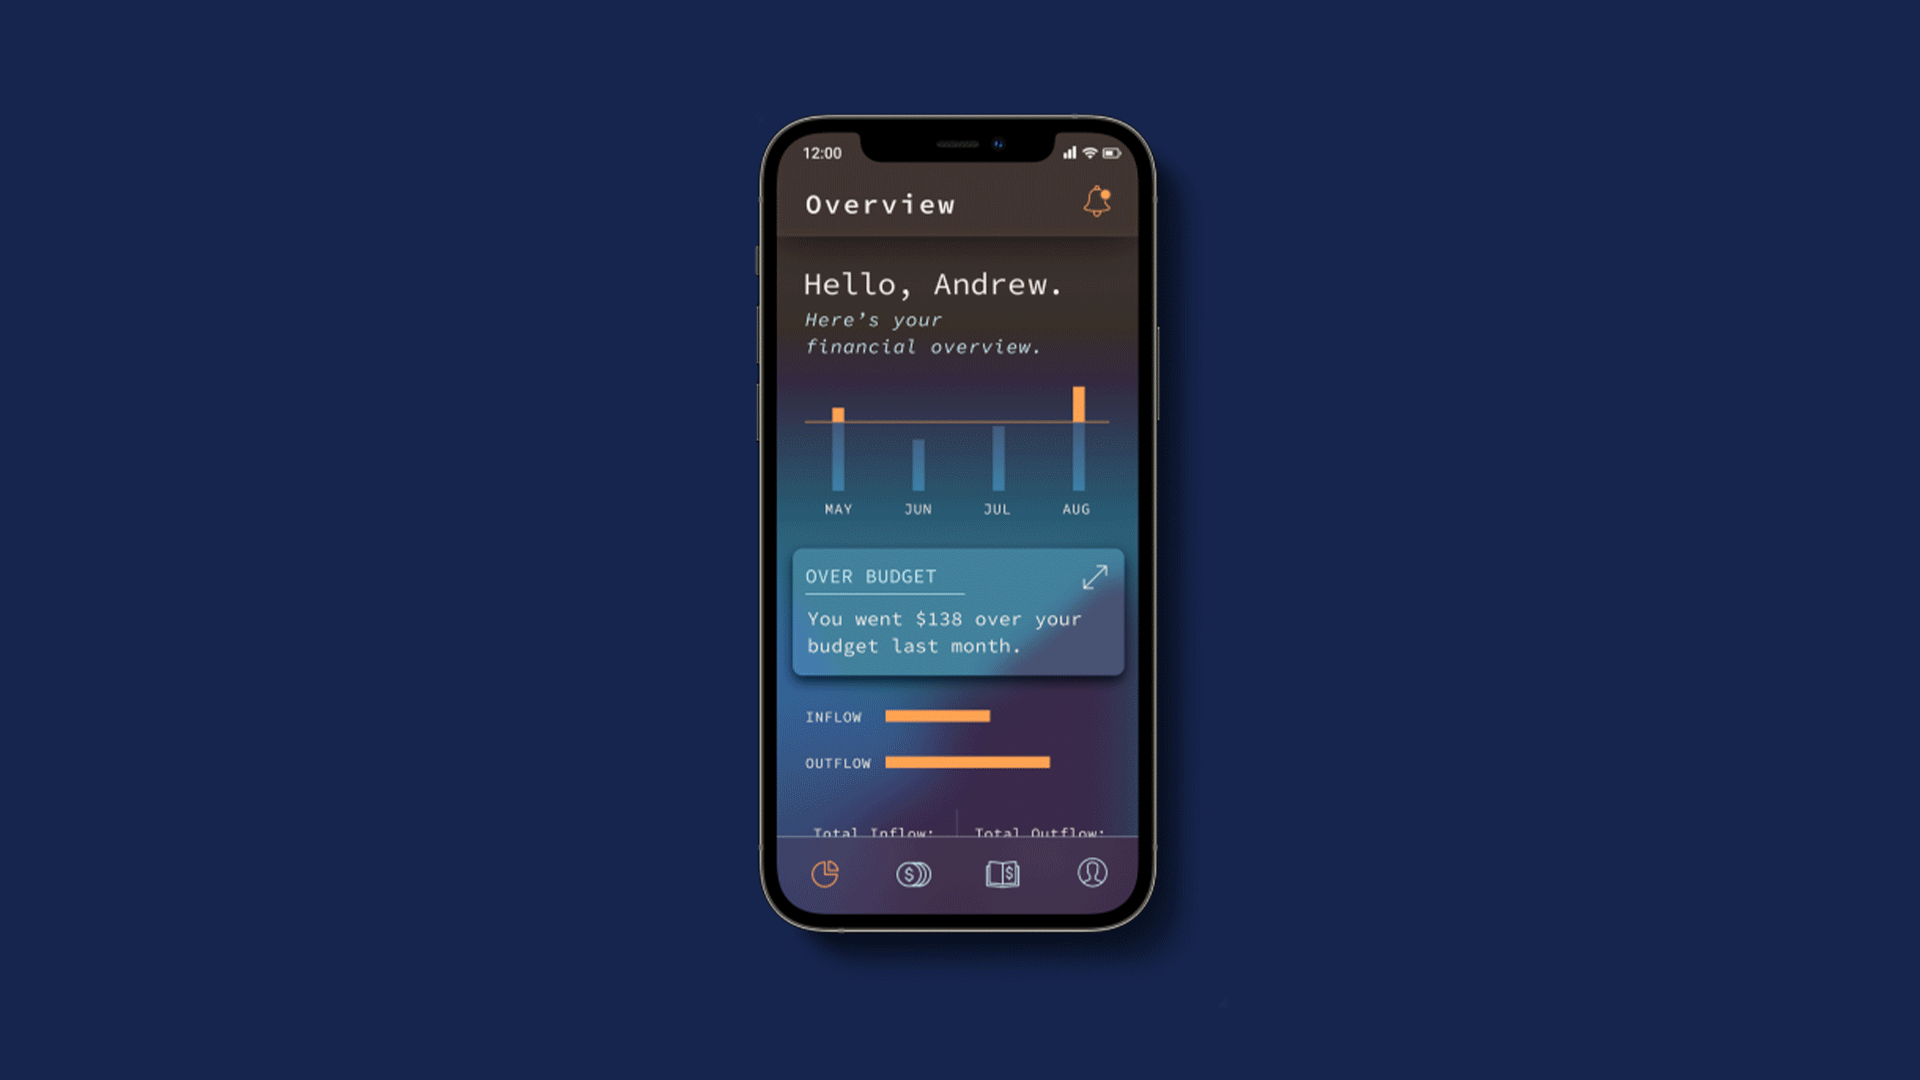 In the center is an iphone mockup showing the home screen of Schollar against a dark blue background. Text and images combine to complete the animation.